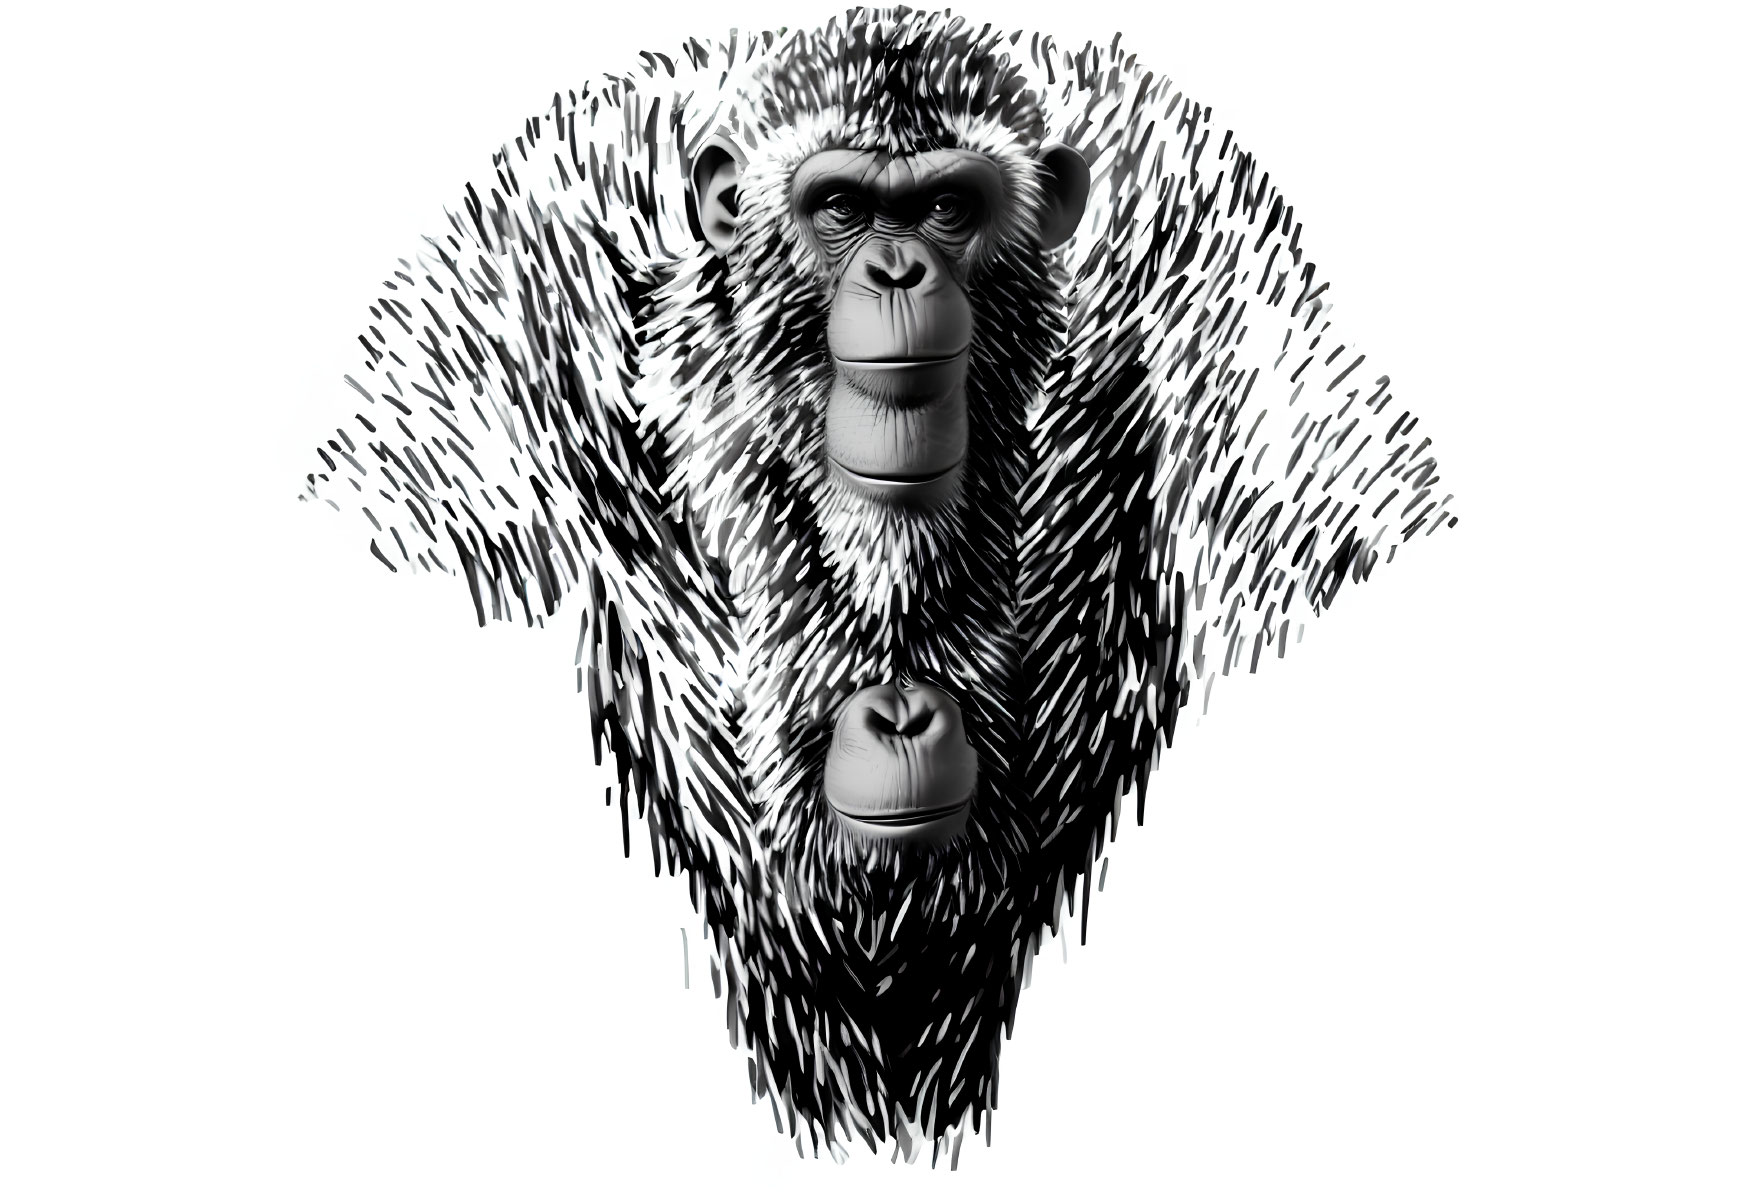 Detailed Gorilla Upper Body and Face Illustration in Bold Black and White Strokes